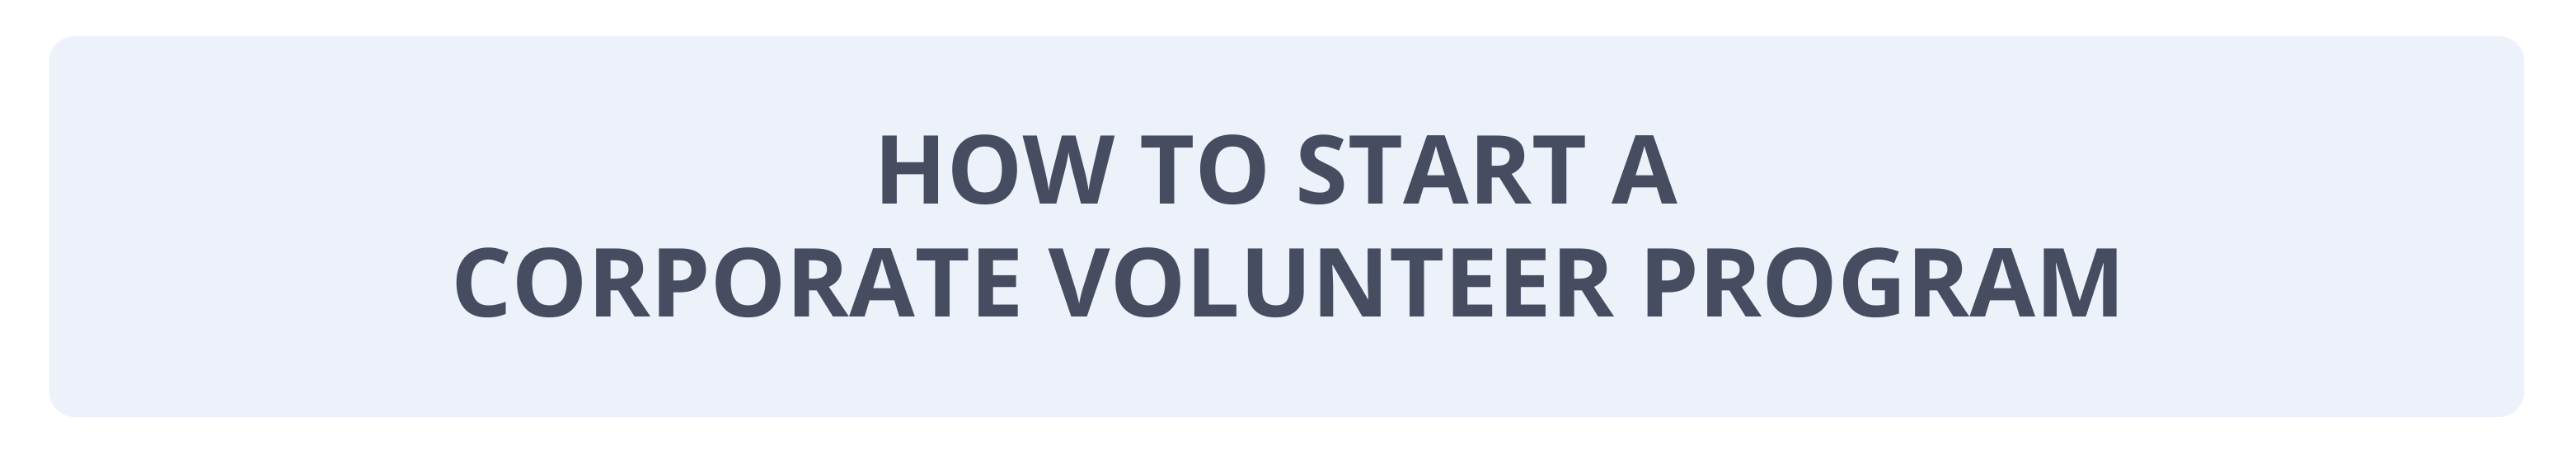 Here is everything your company needs to know about starting a volunteer program.